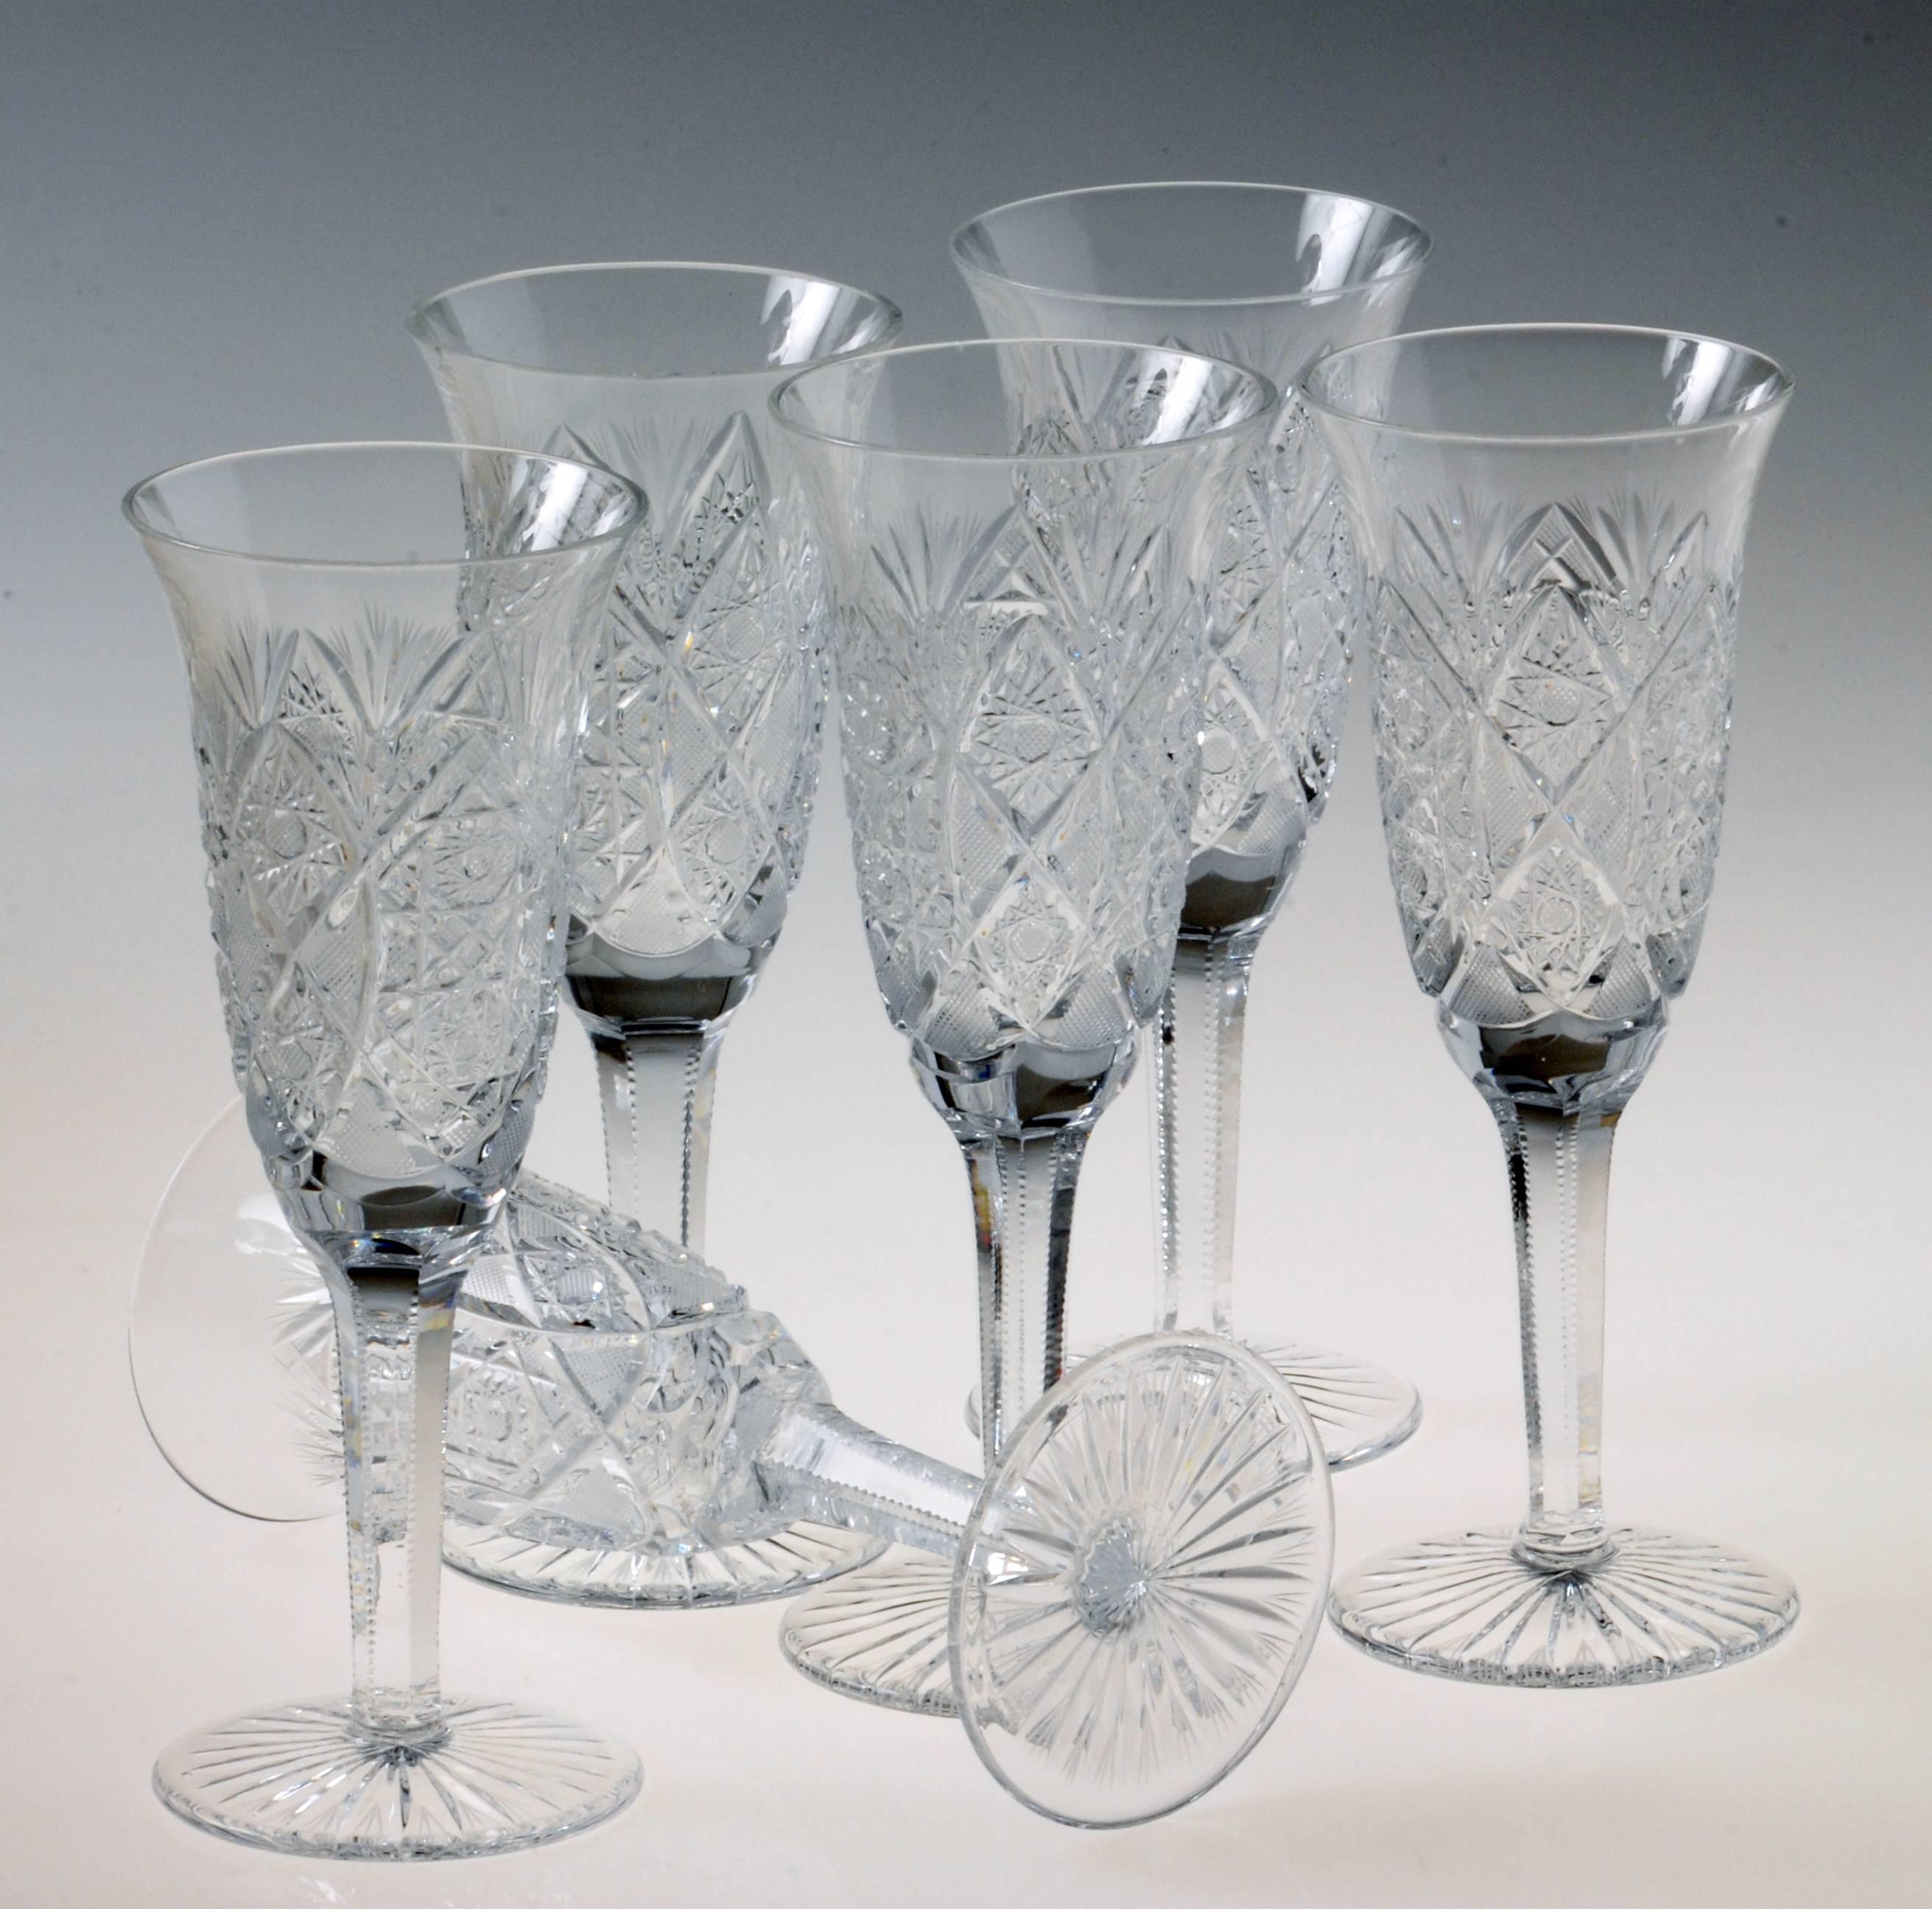 Glass 24 Pieces Crystal Drinking Set by Moser, Czech Republic, 1960